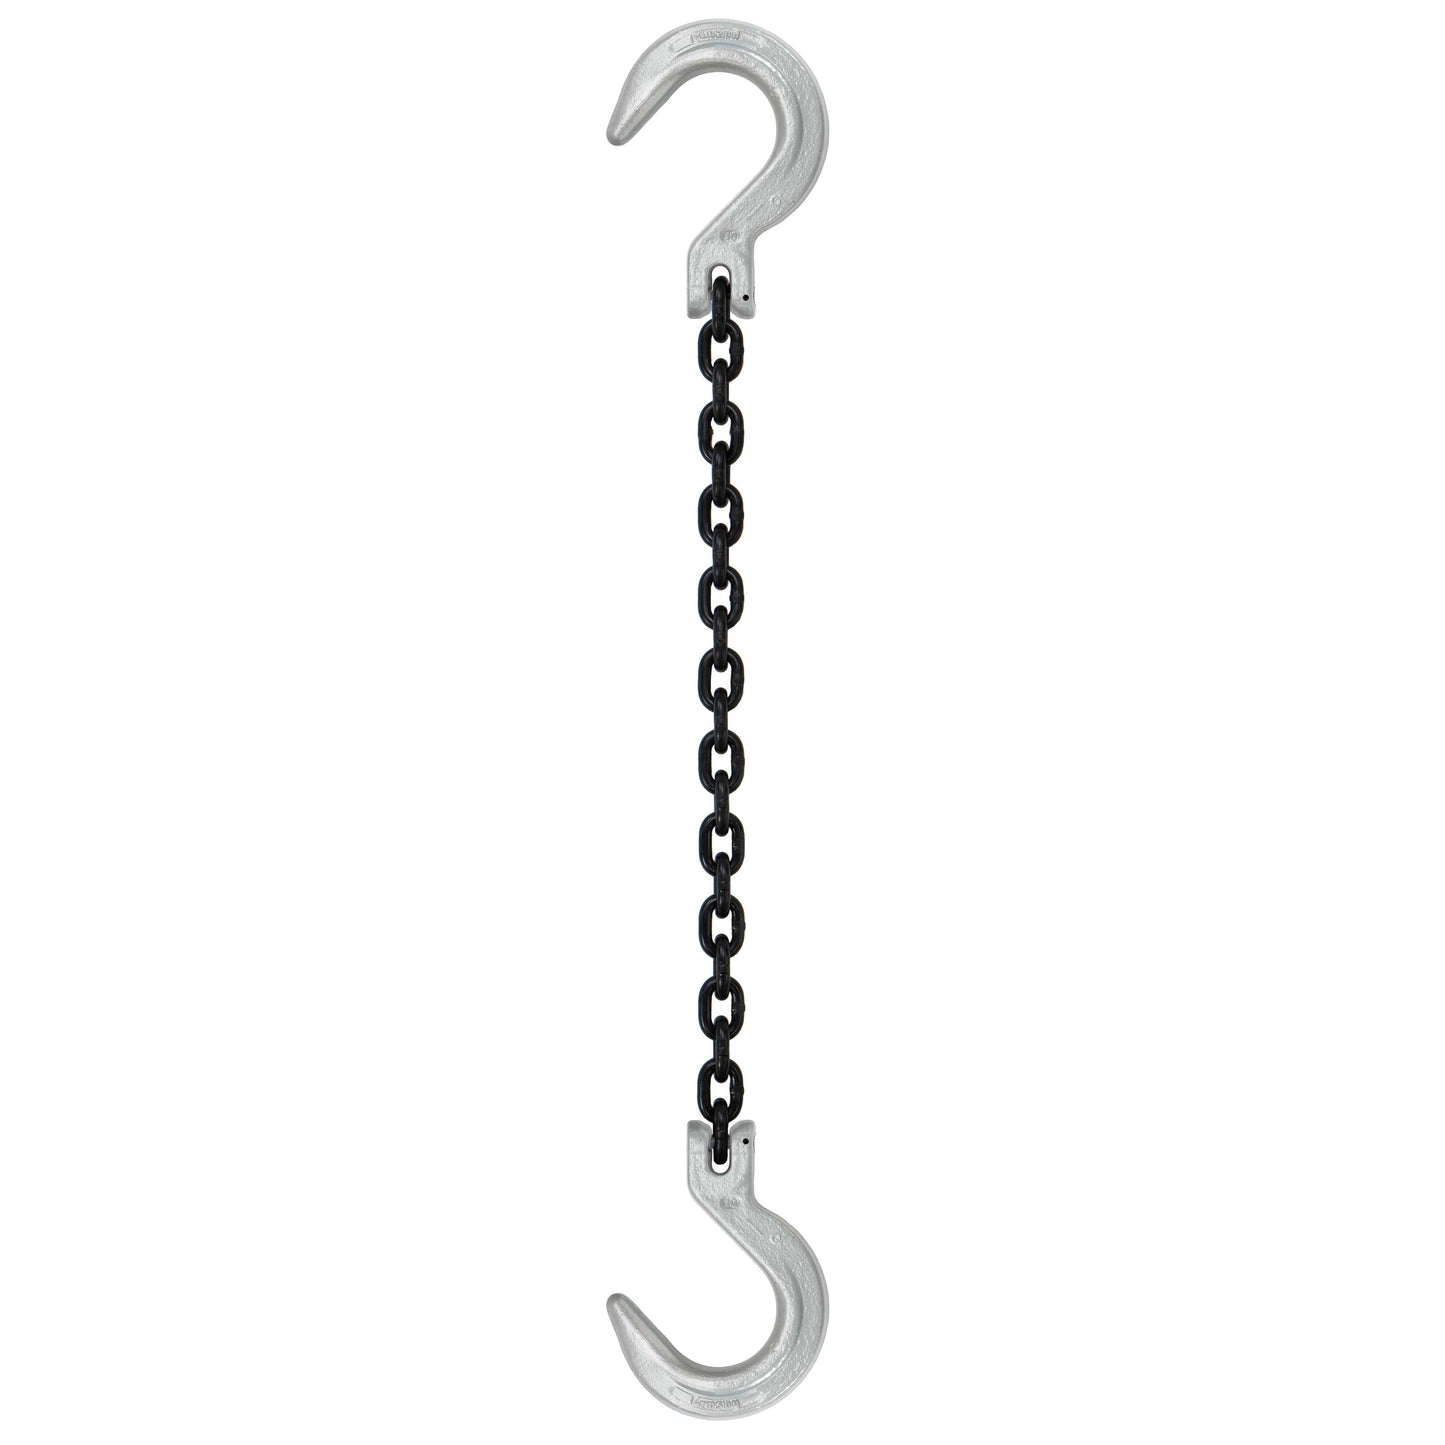 932 inch x 10 foot Domestic Single Leg Chain Sling w Crosby Foundry & Foundry Hooks Grade 100 image 1 of 2